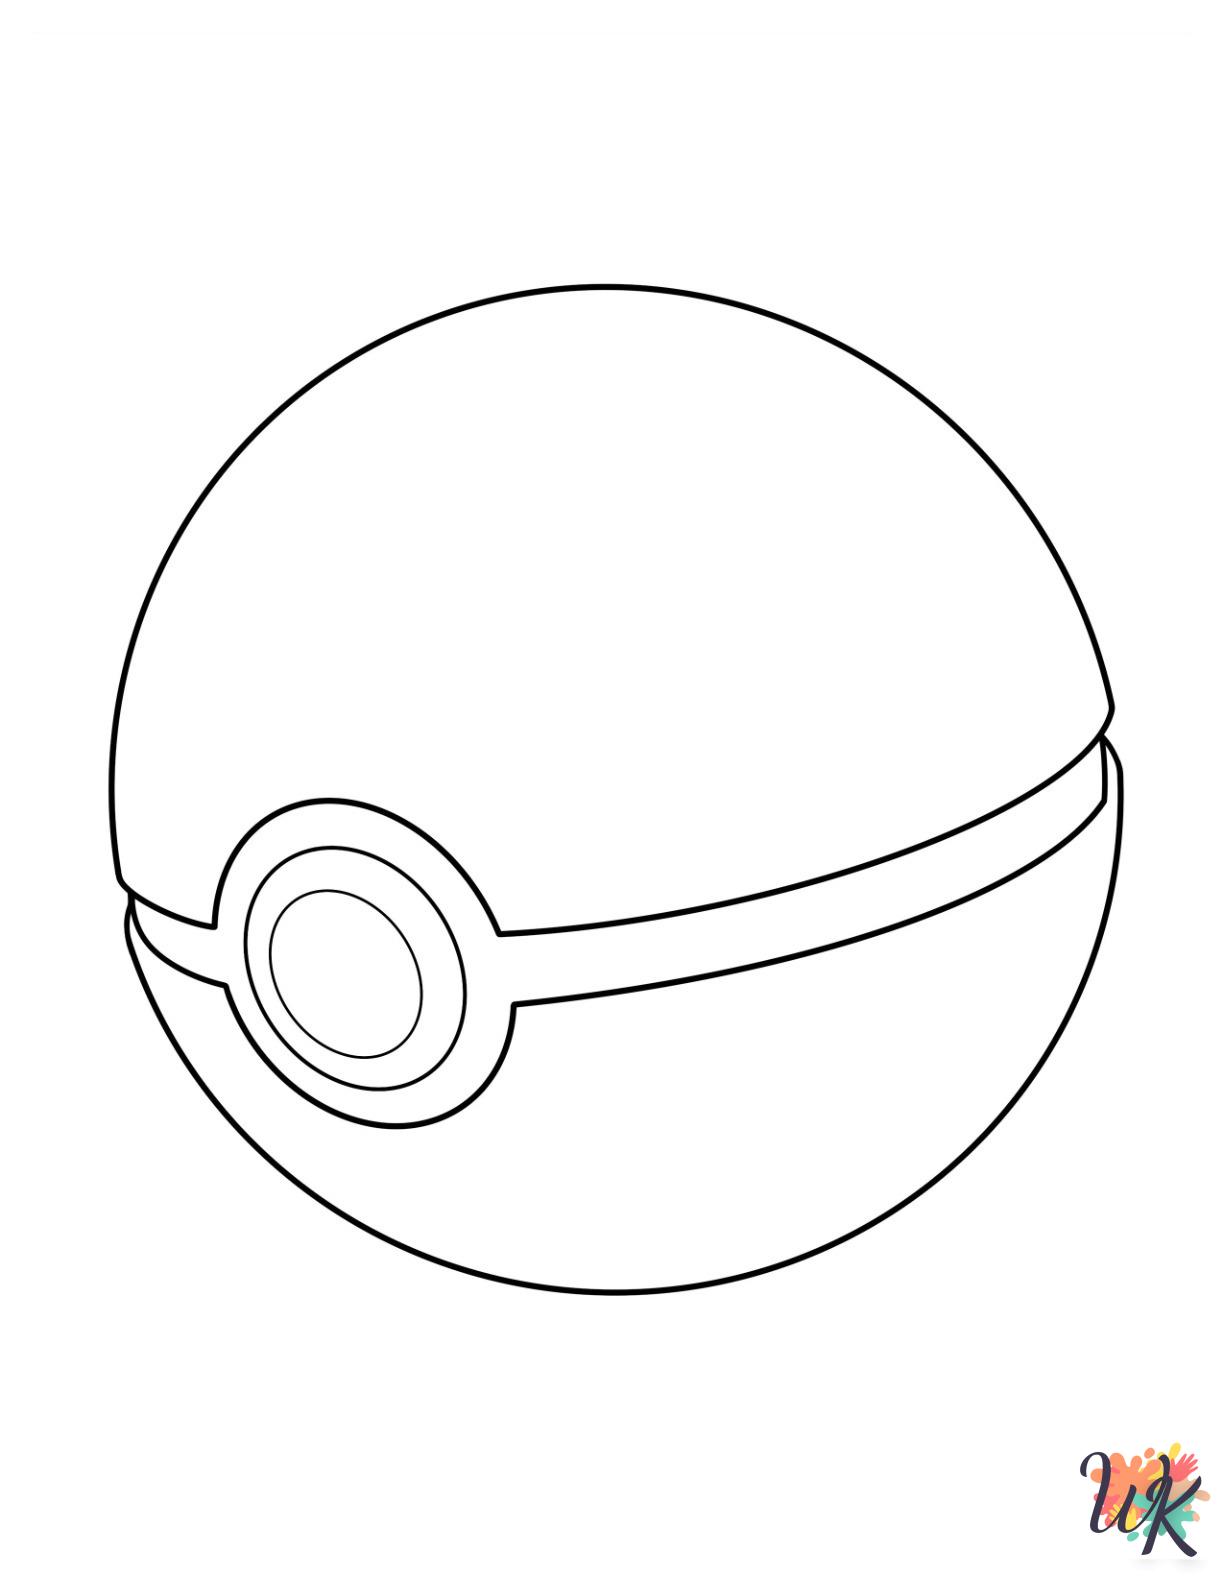 Pokeball coloring pages for preschoolers